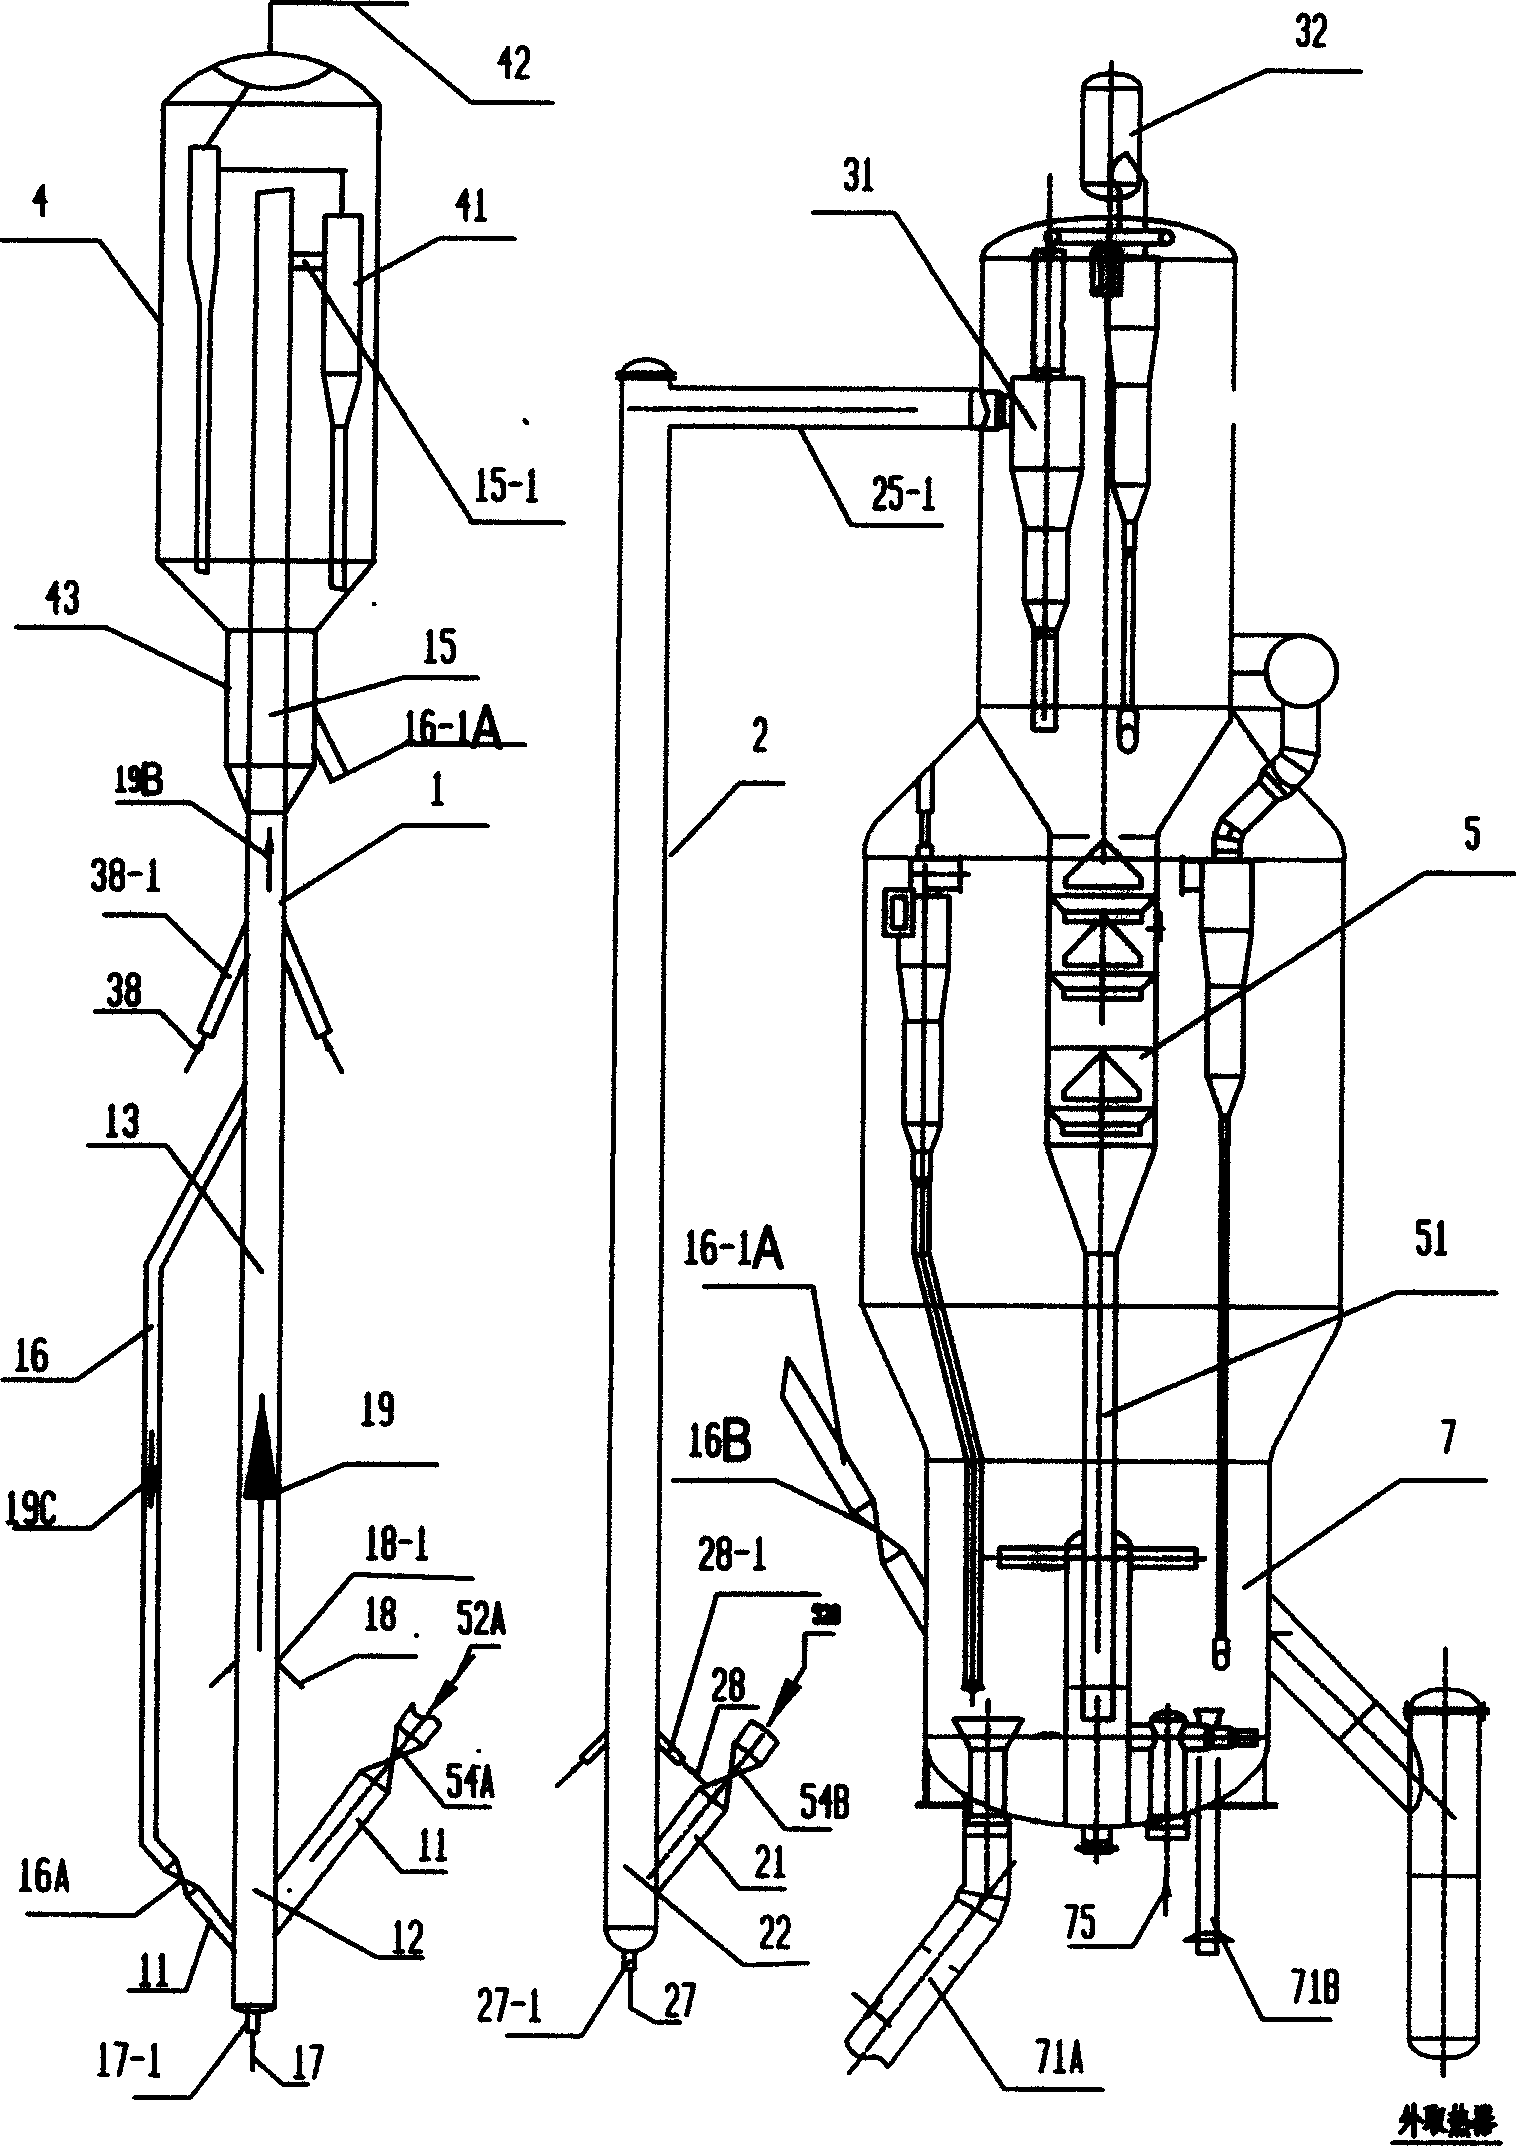 Catalytic cracking method and equipment for producing more propylene